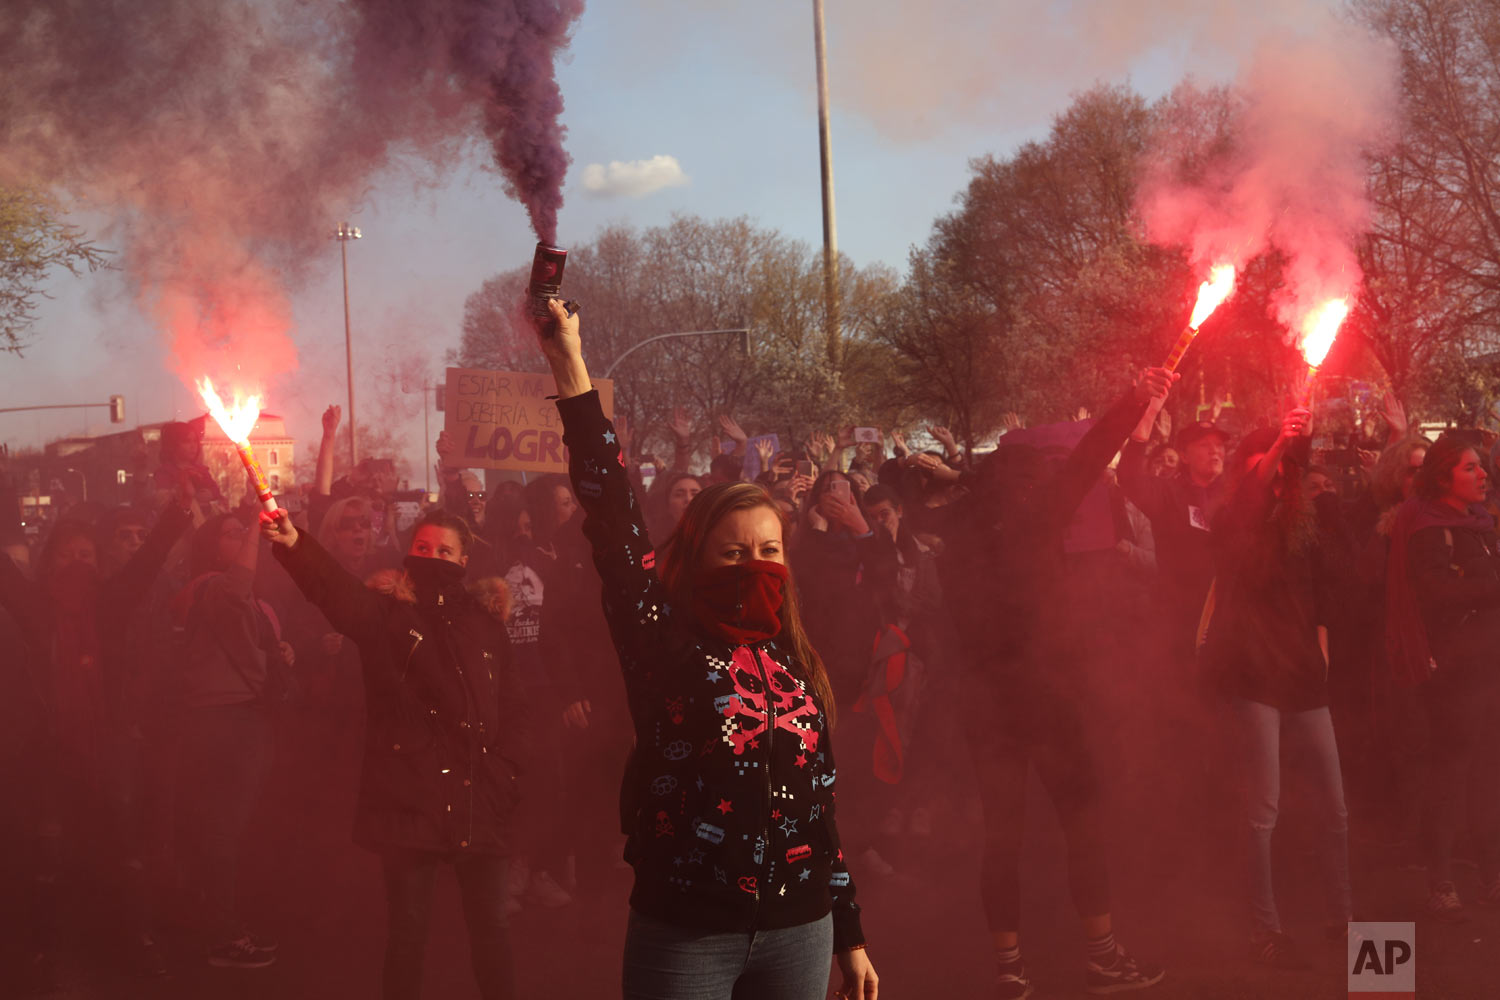  Women hold flares during a march for International Women's Day in Madrid, Spain, Friday, March 8, 2019. Marches and protests are held Friday across the globe to mark International Women's Day under the slogan #BalanceforBetter, with calls for a more